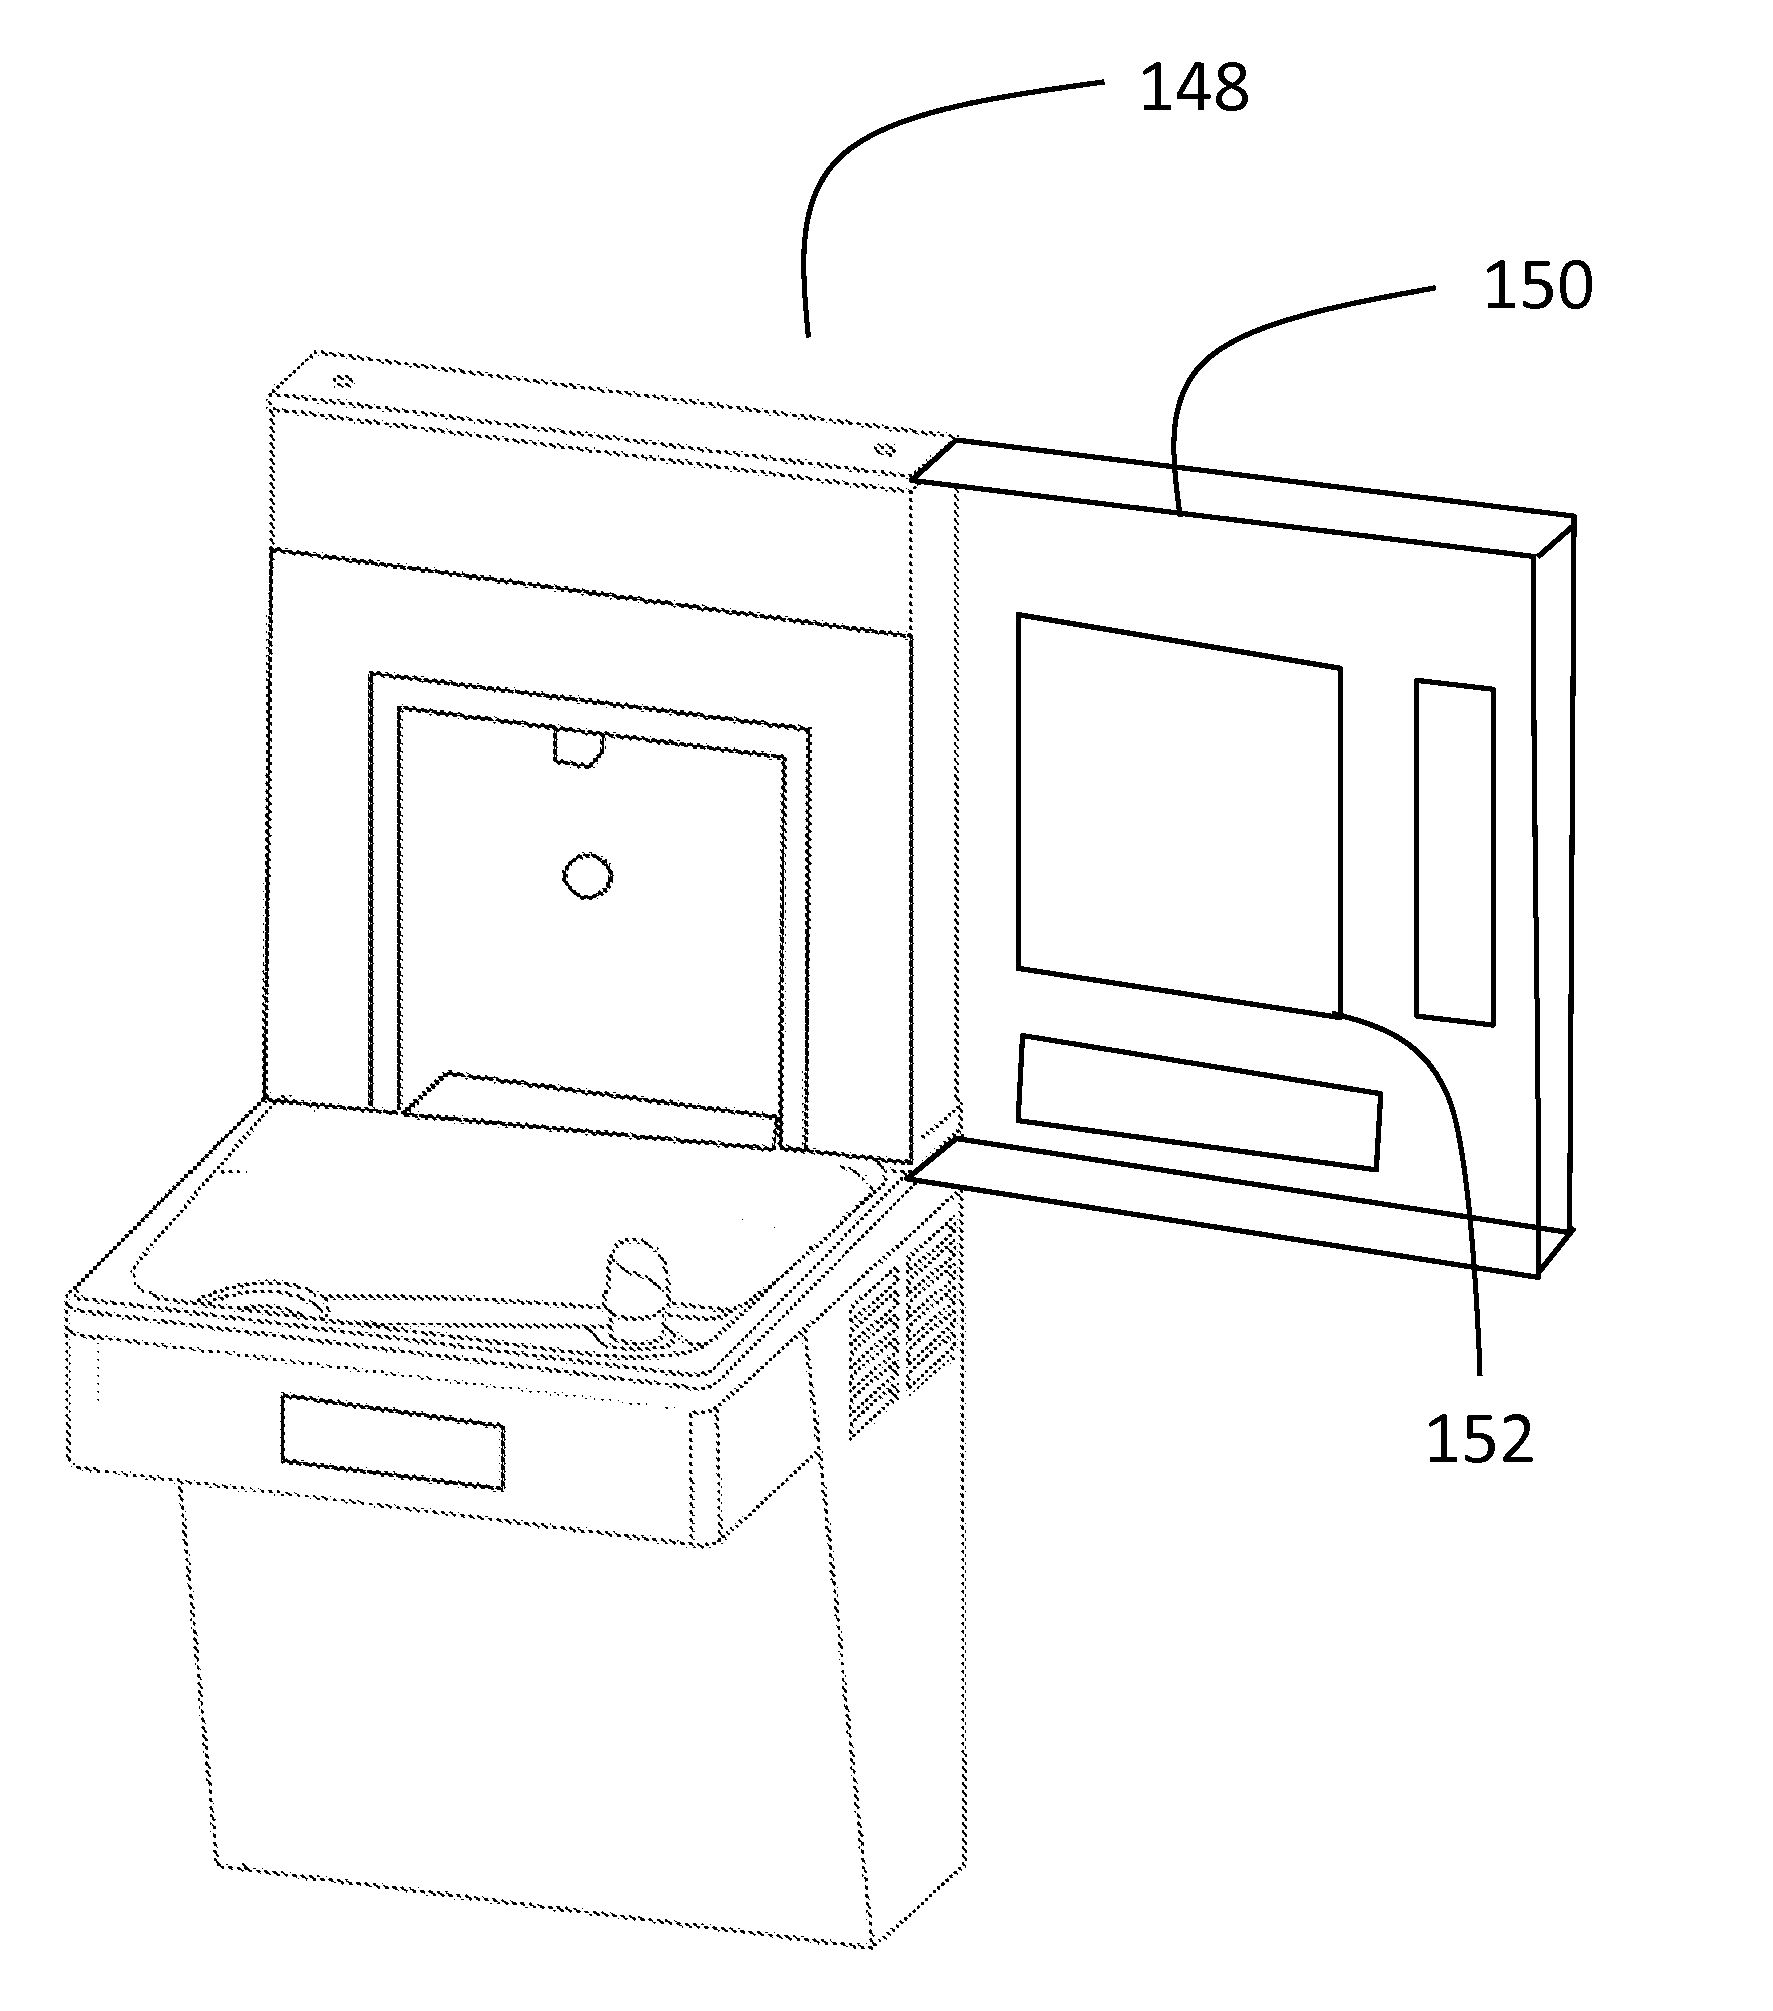 Apparatus and method for operation of networked drinking fountains